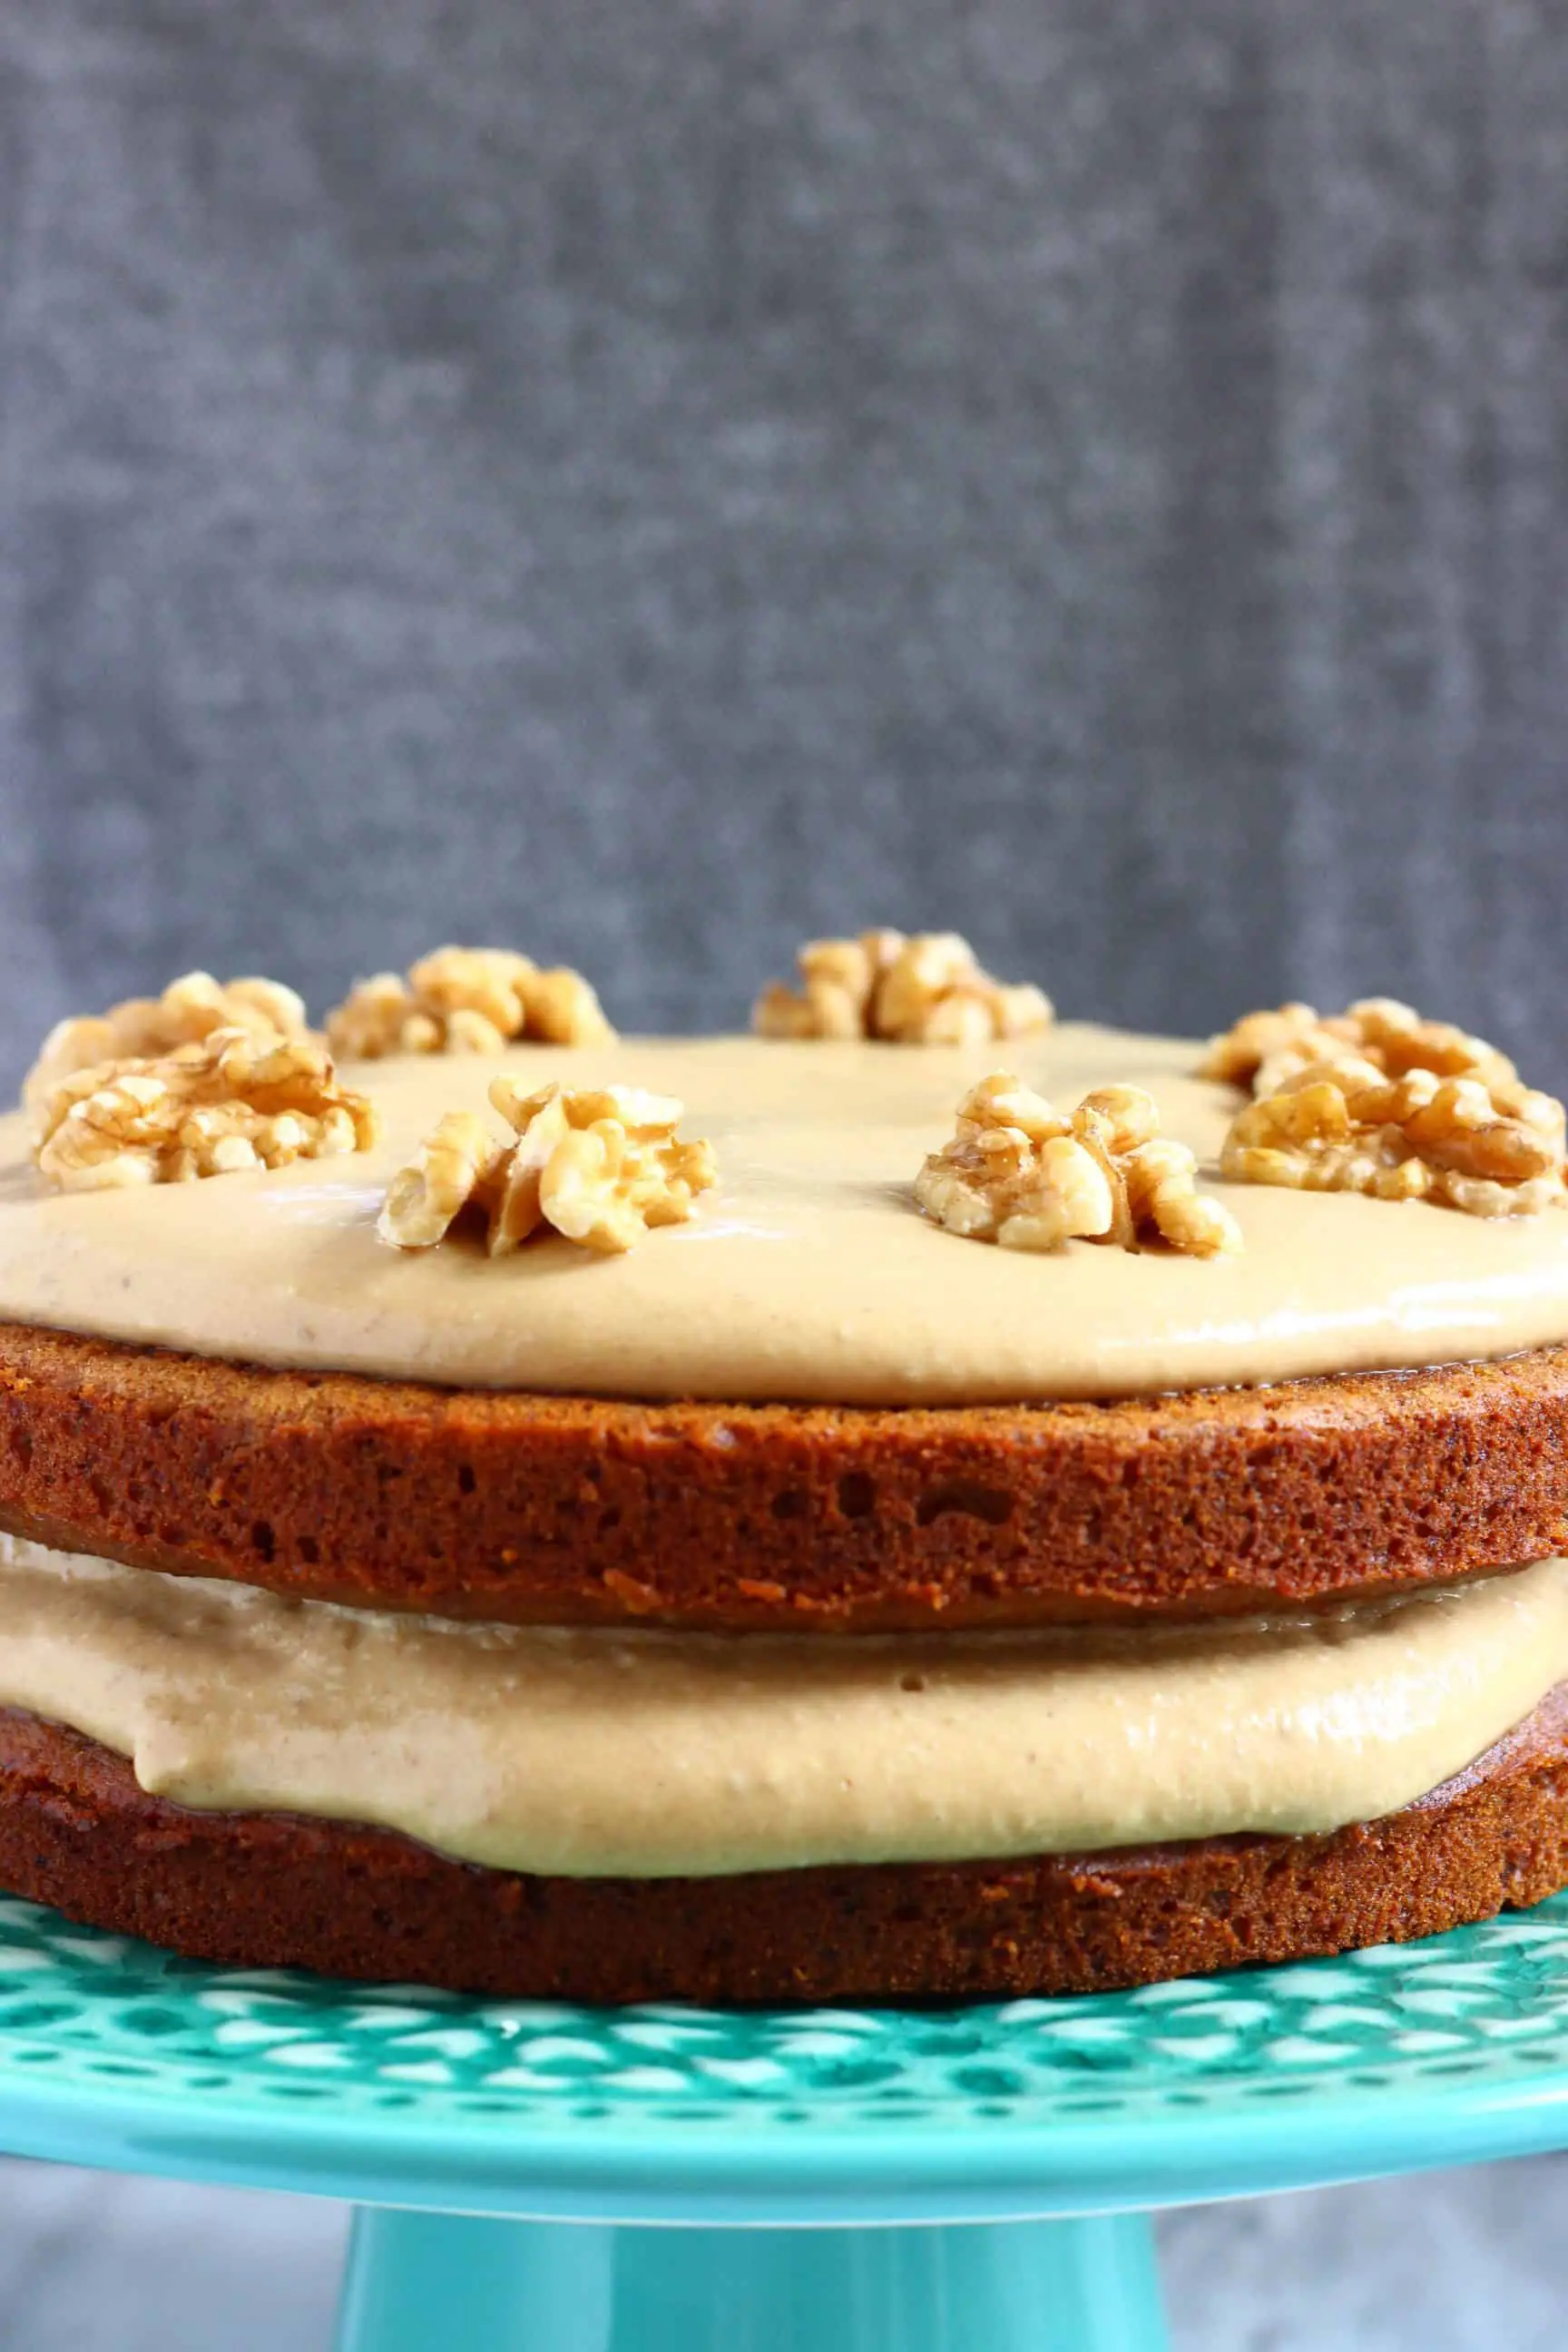 A gluten-free vegan coffee cake sandwiched with coffee frosting topped with walnuts on a cake stand